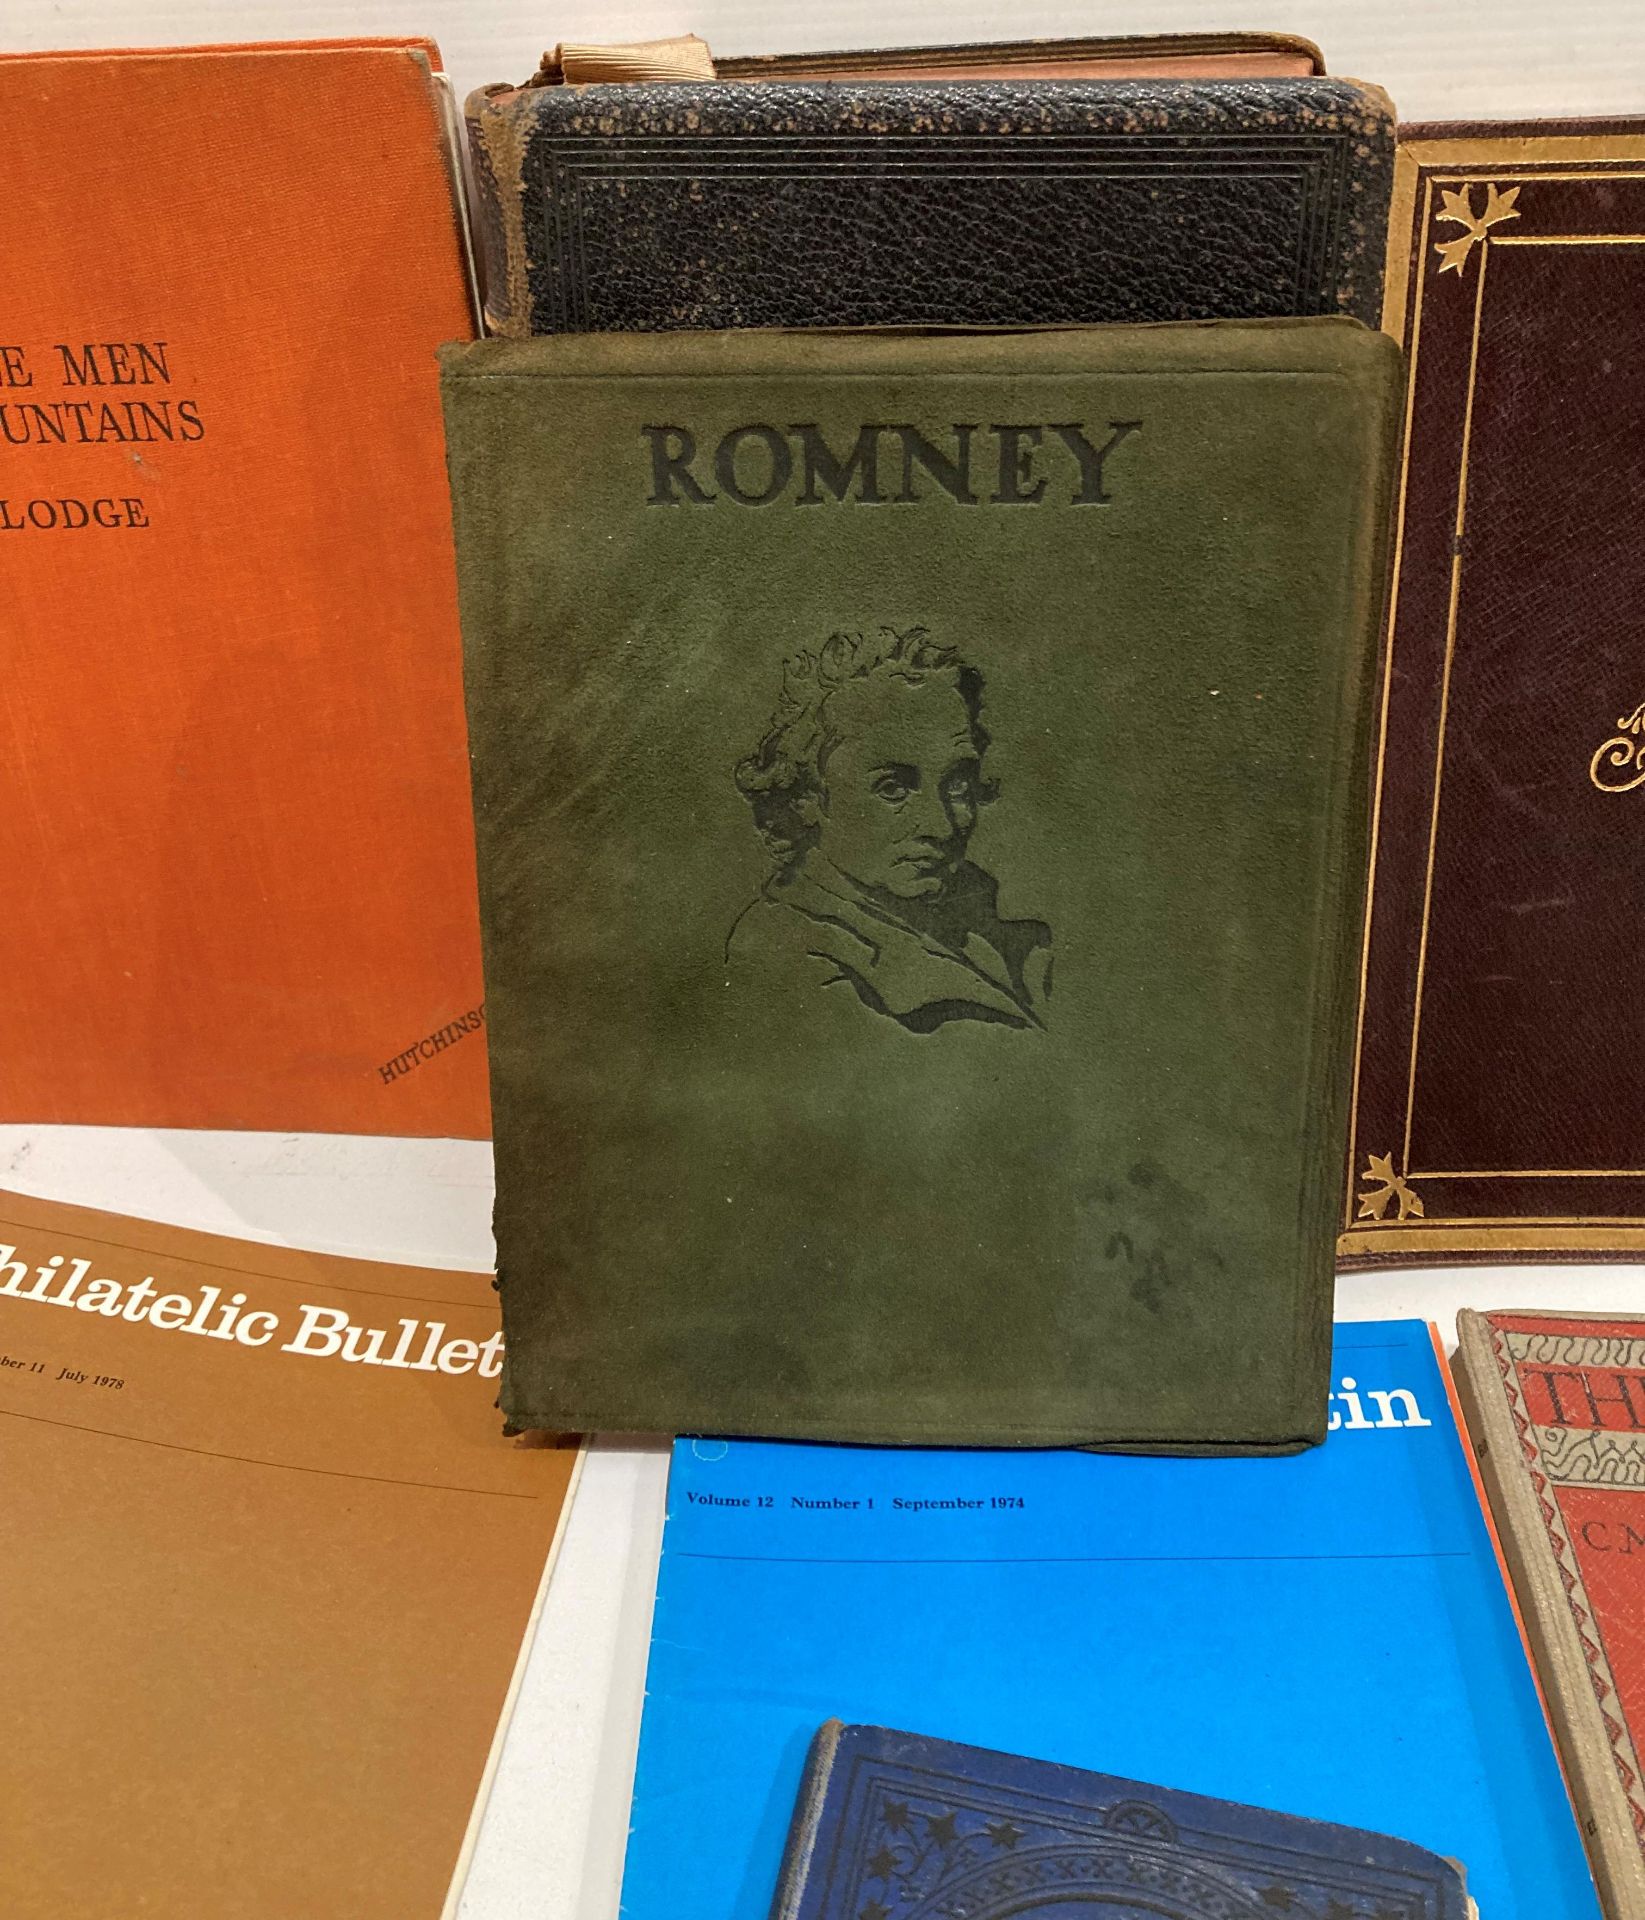 Contents to box - a vintage leather-bound Common Prayer Book, Romney book, - Image 2 of 2